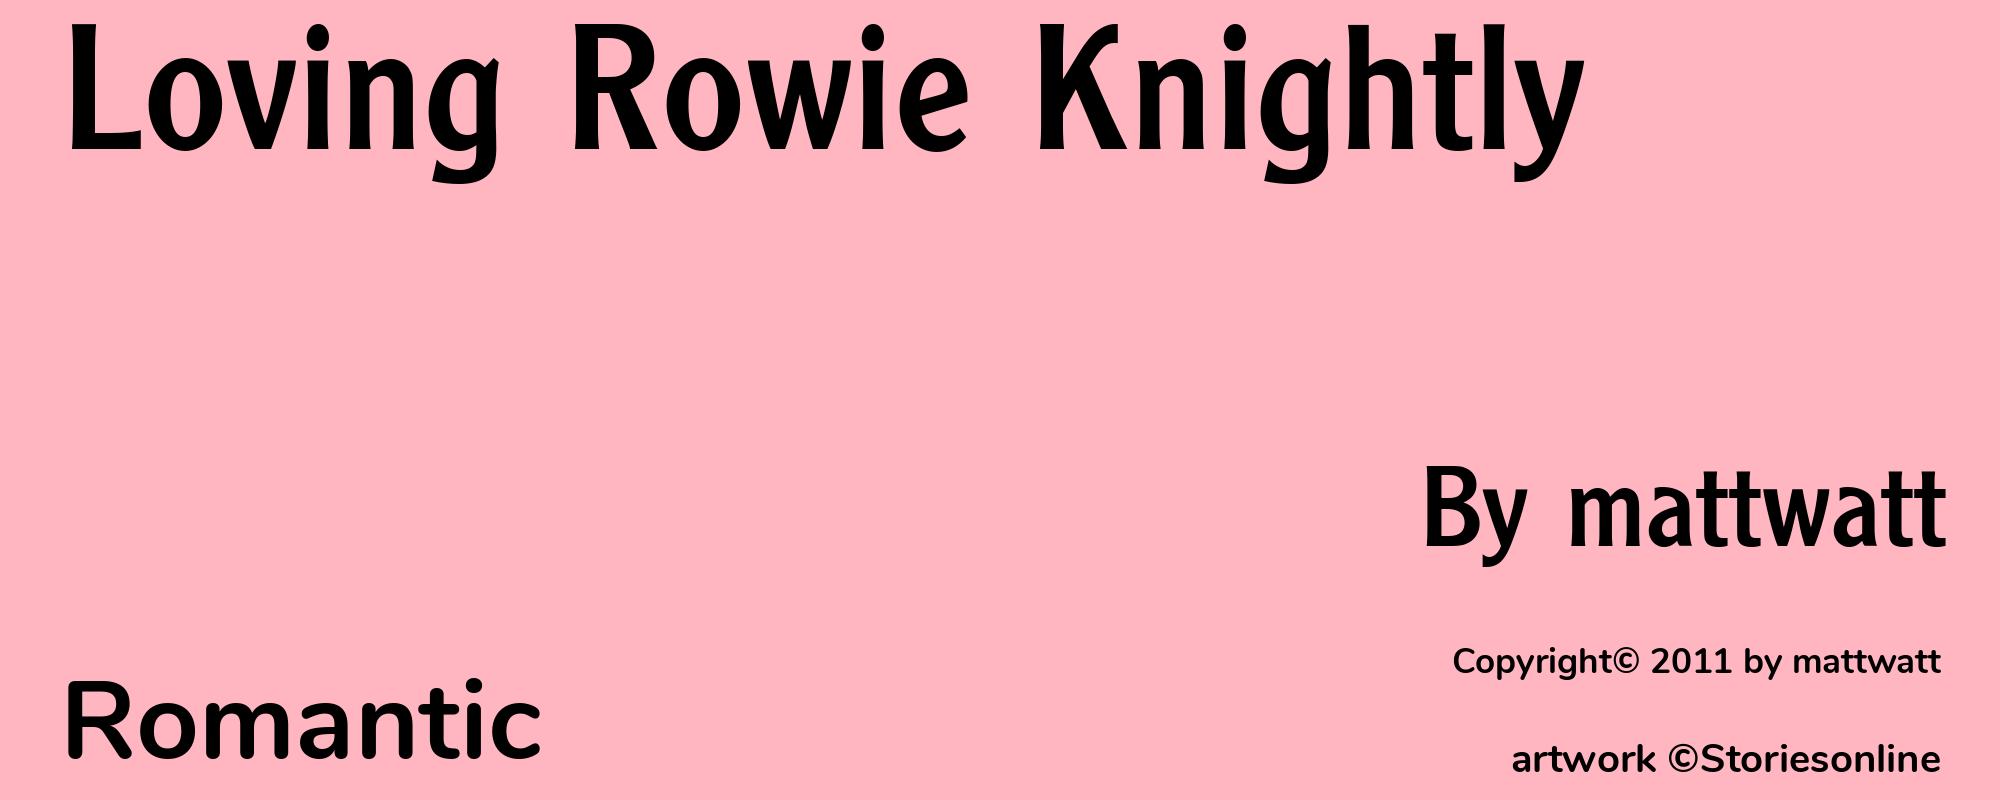 Loving Rowie Knightly - Cover